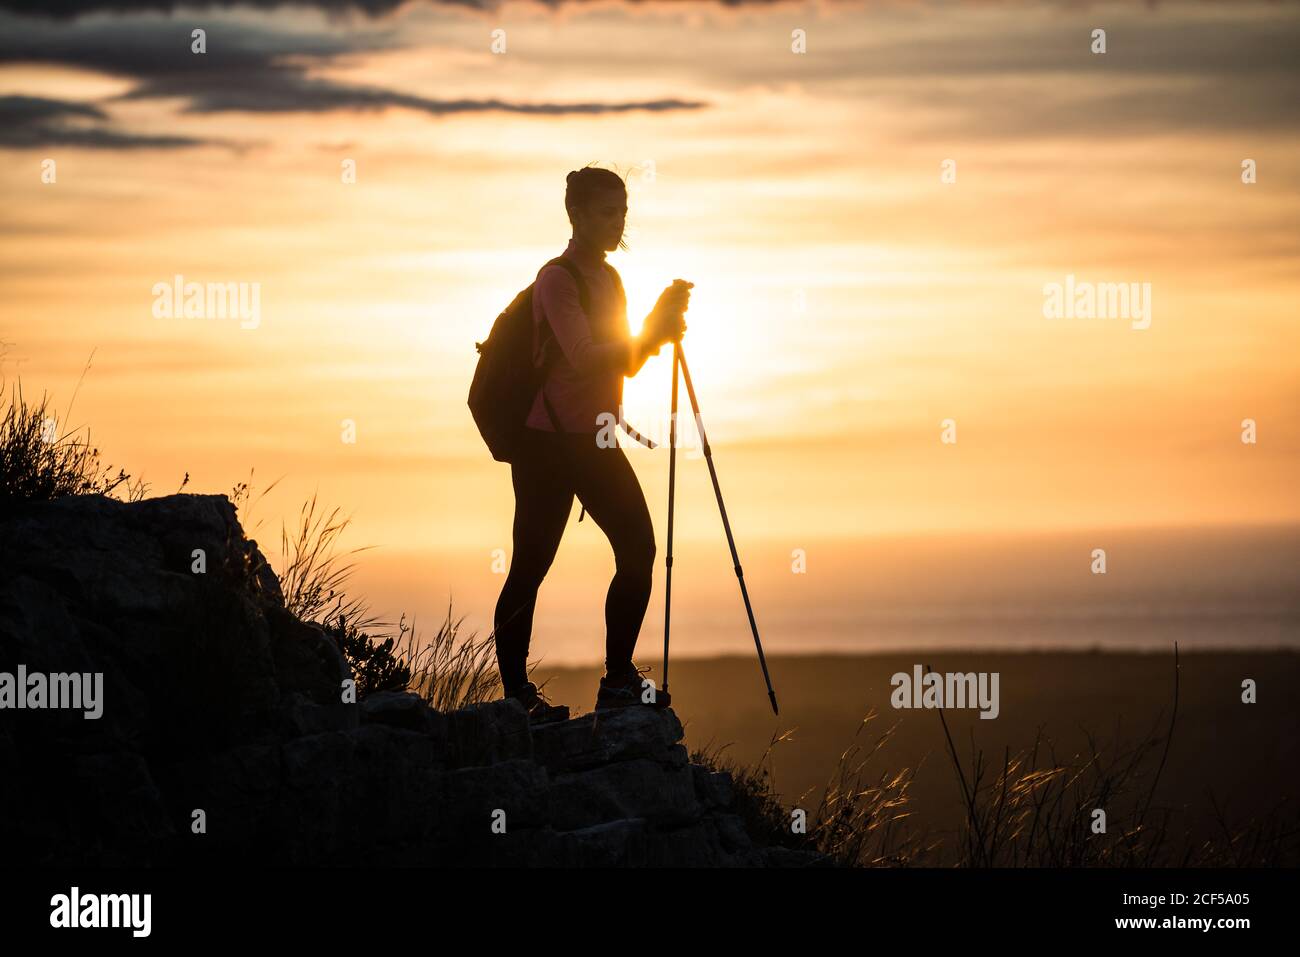 Silhouette of unrecognizable Woman standing with walking sticks on stony hill spreading arms wide in sunset Stock Photo